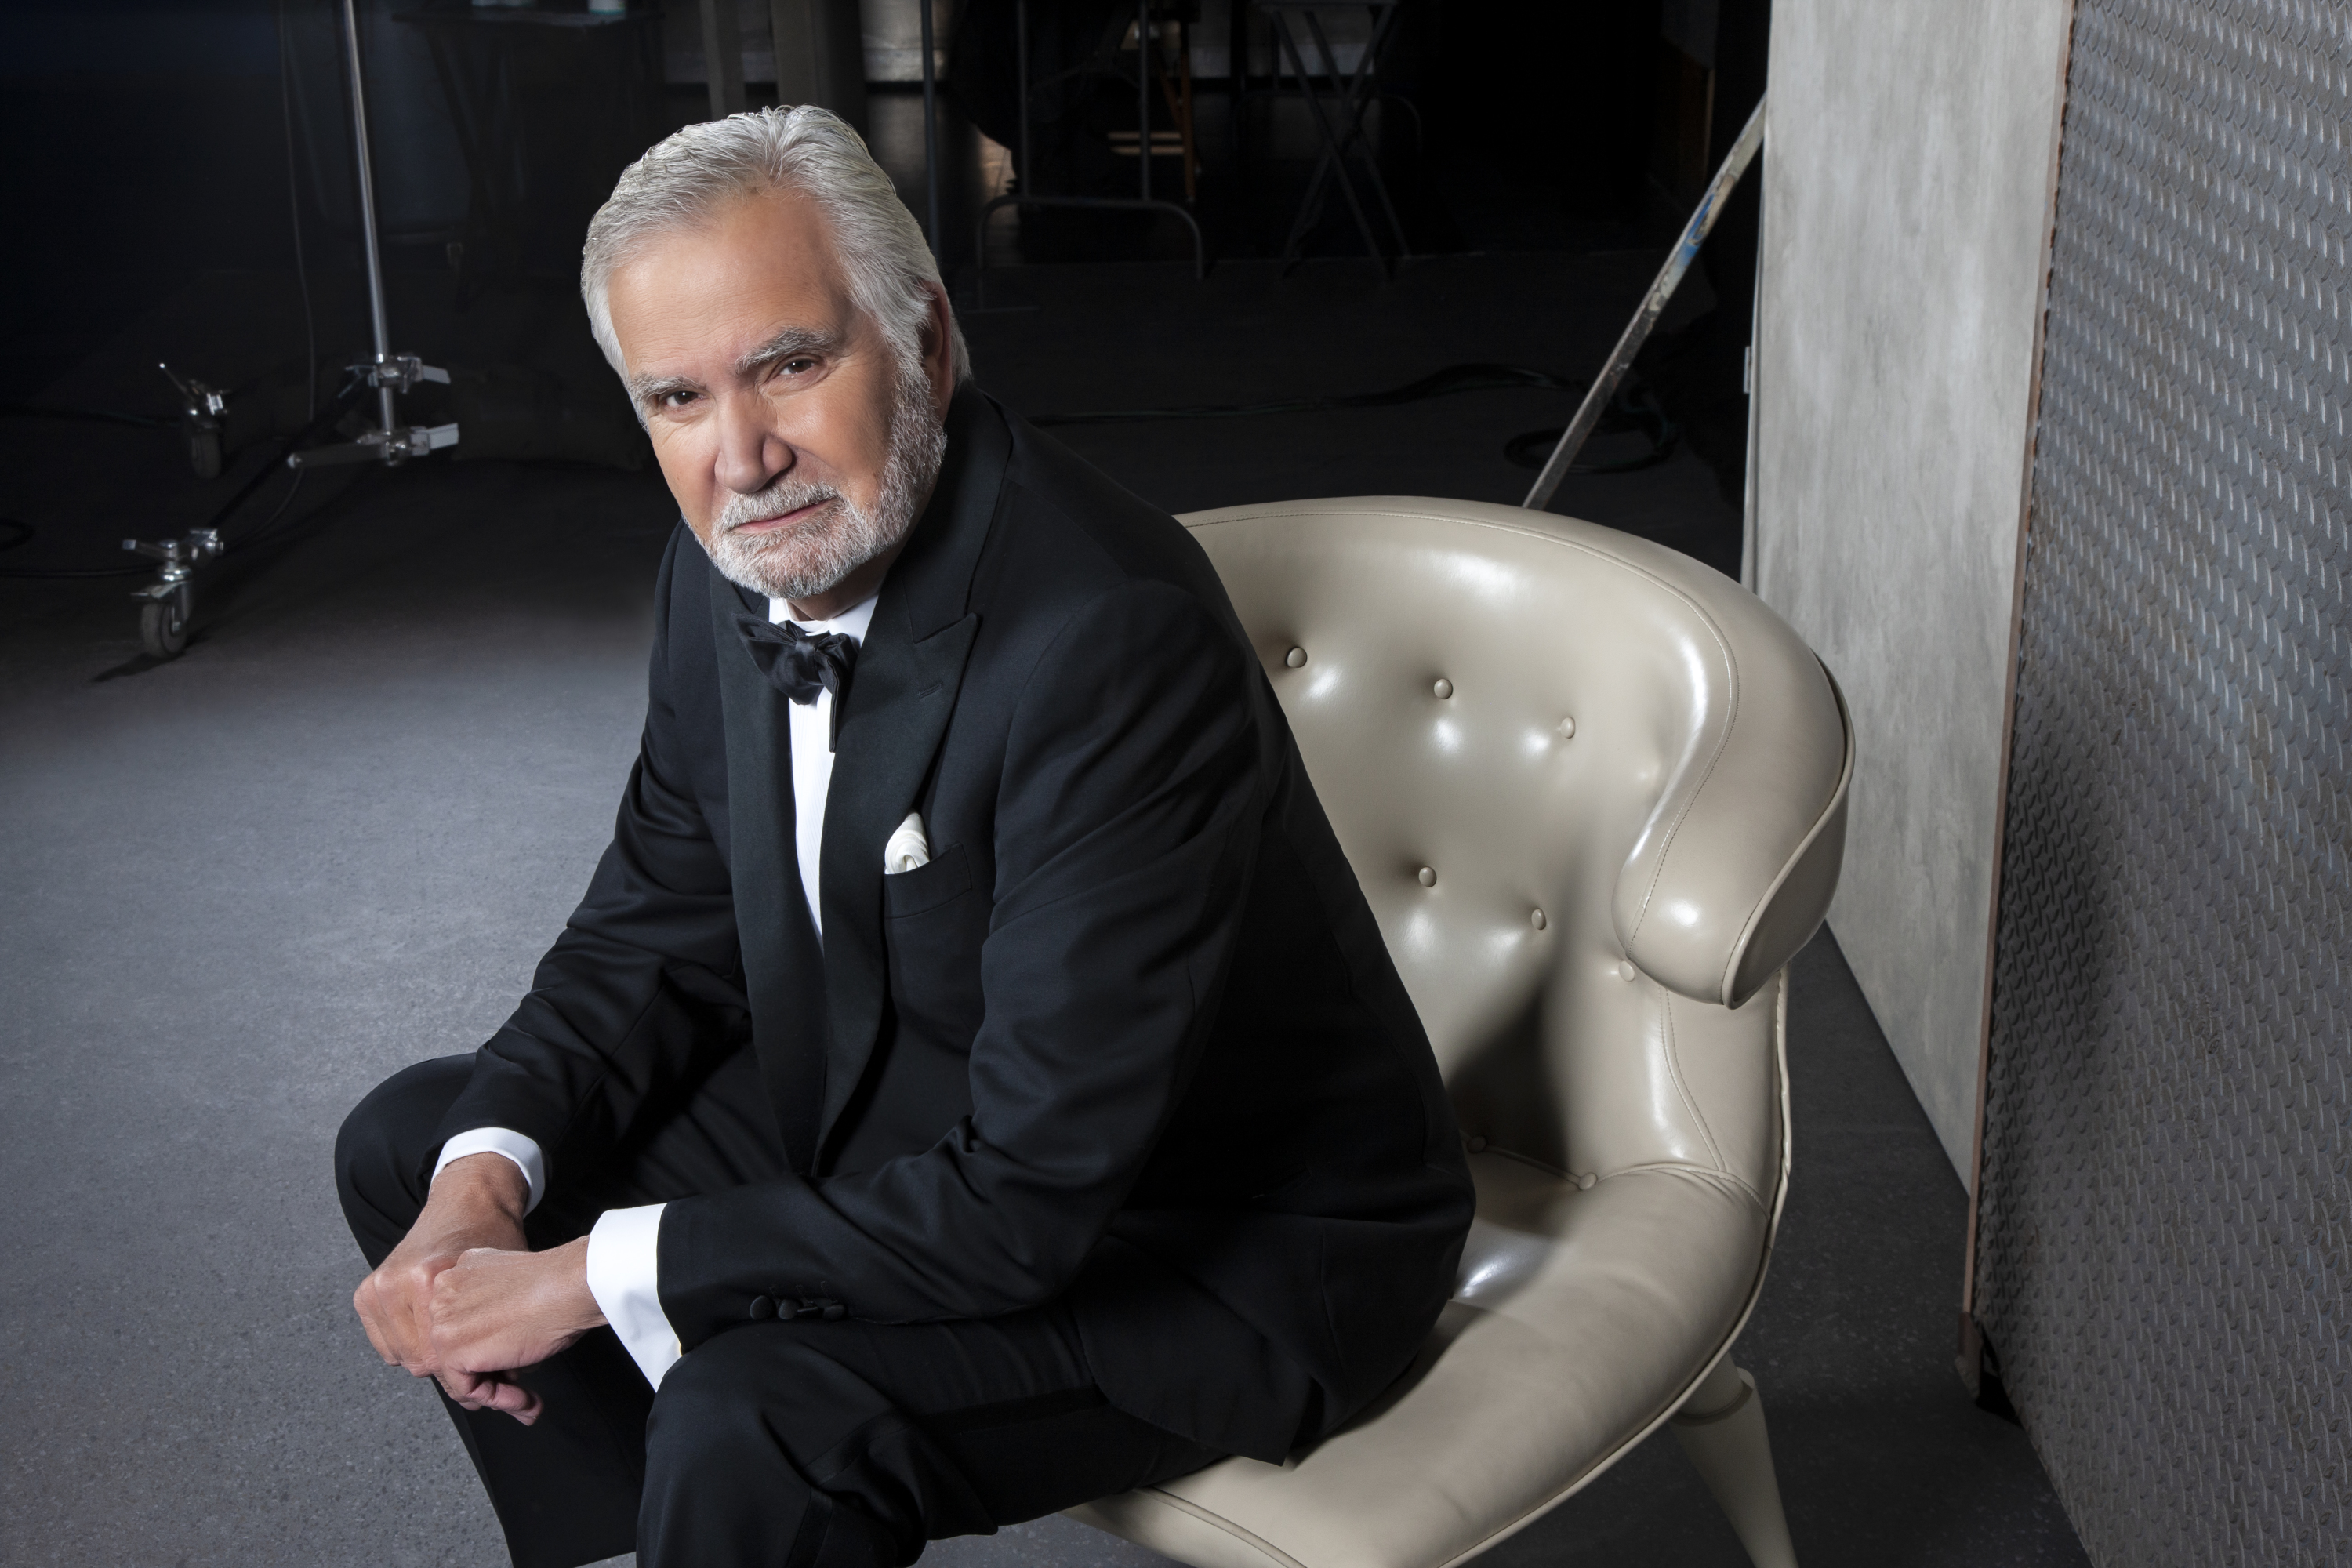 'The Bold and the Beautiful' actor John McCook dressed in a black tuxedo poses in character as Eric Forrester for a photoshoot.